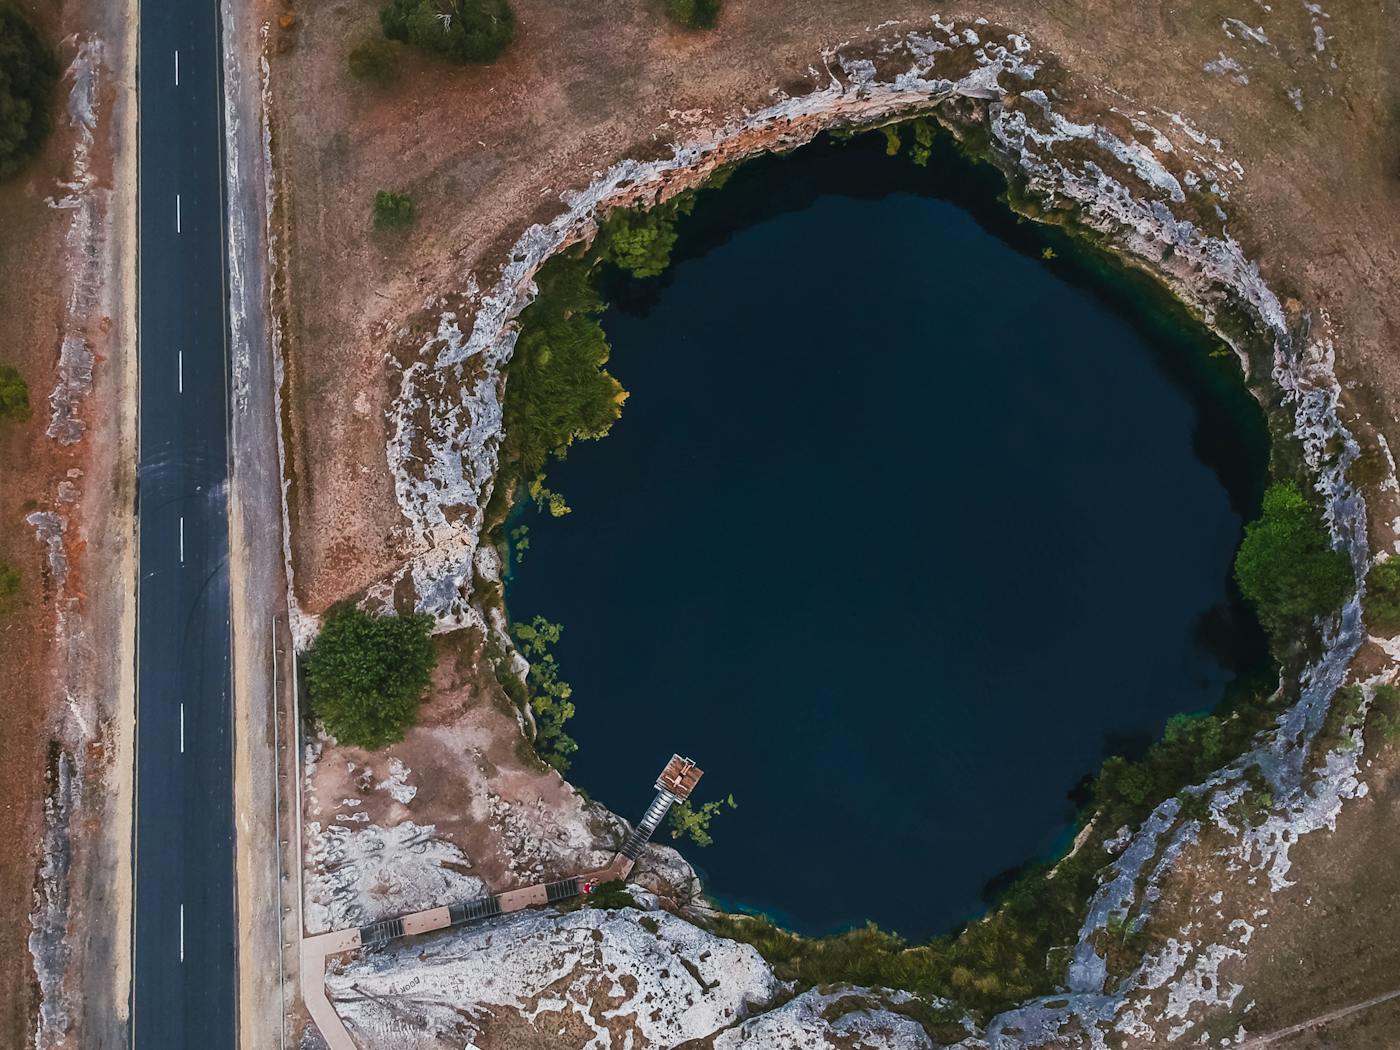 A drone shot of 'Little Blue Lake' near Mt Schank, South Australia. An easily accesible local hotspot for cooling off in the extreme summertime heat.